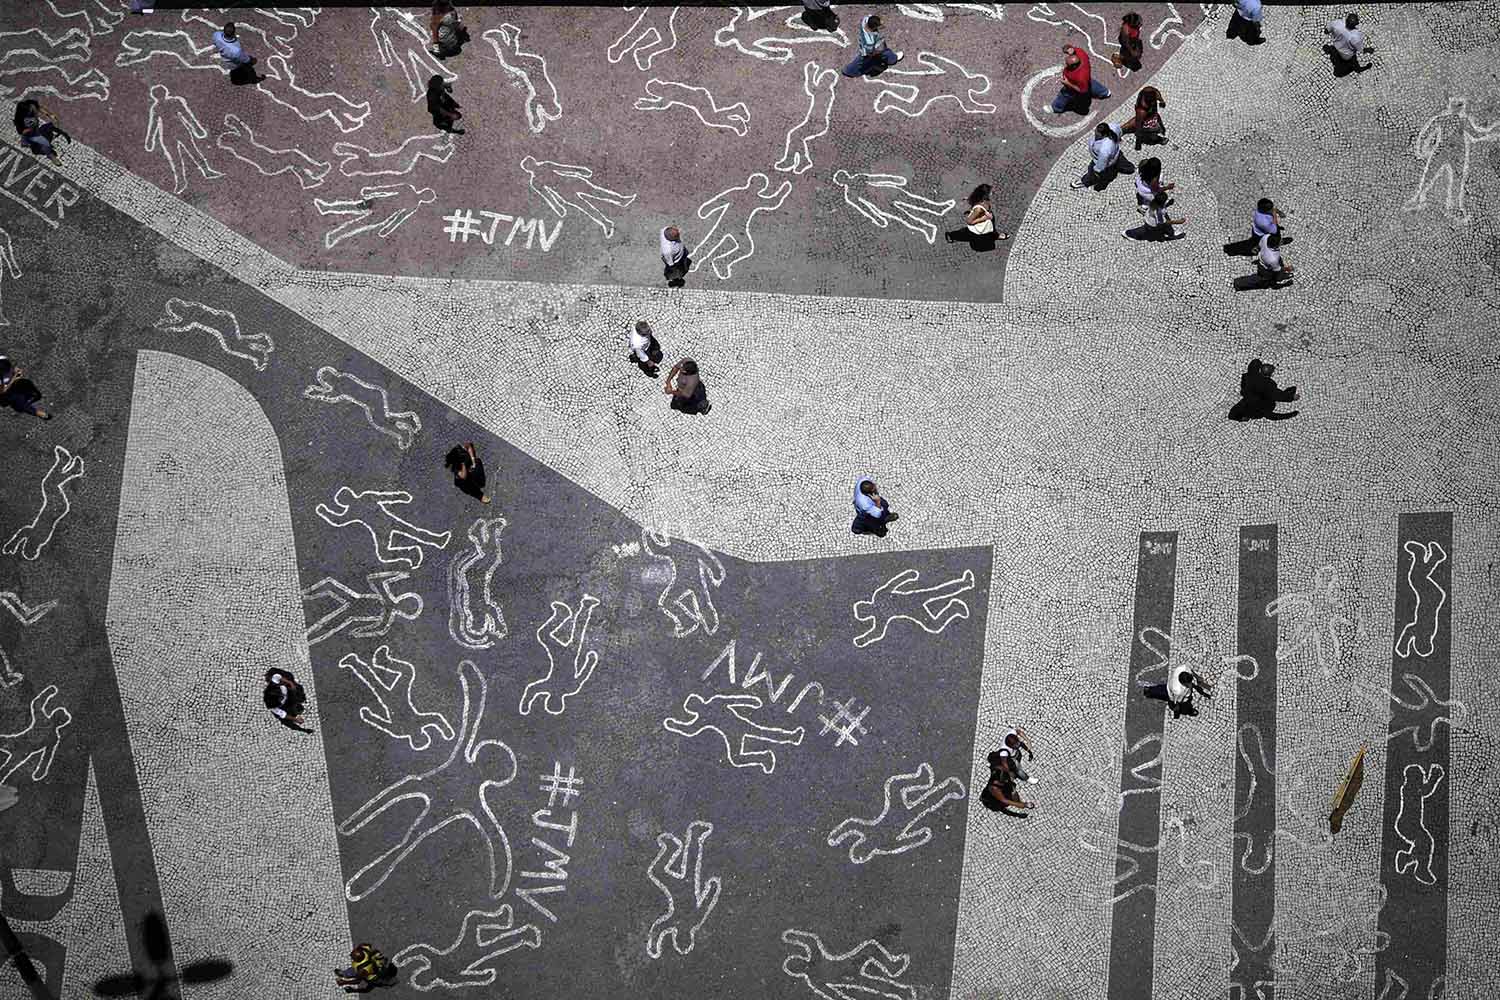 People walk over drawings depicting chalk outlines of bodies during a protest at Carioca square in downtown Rio de Janeiro